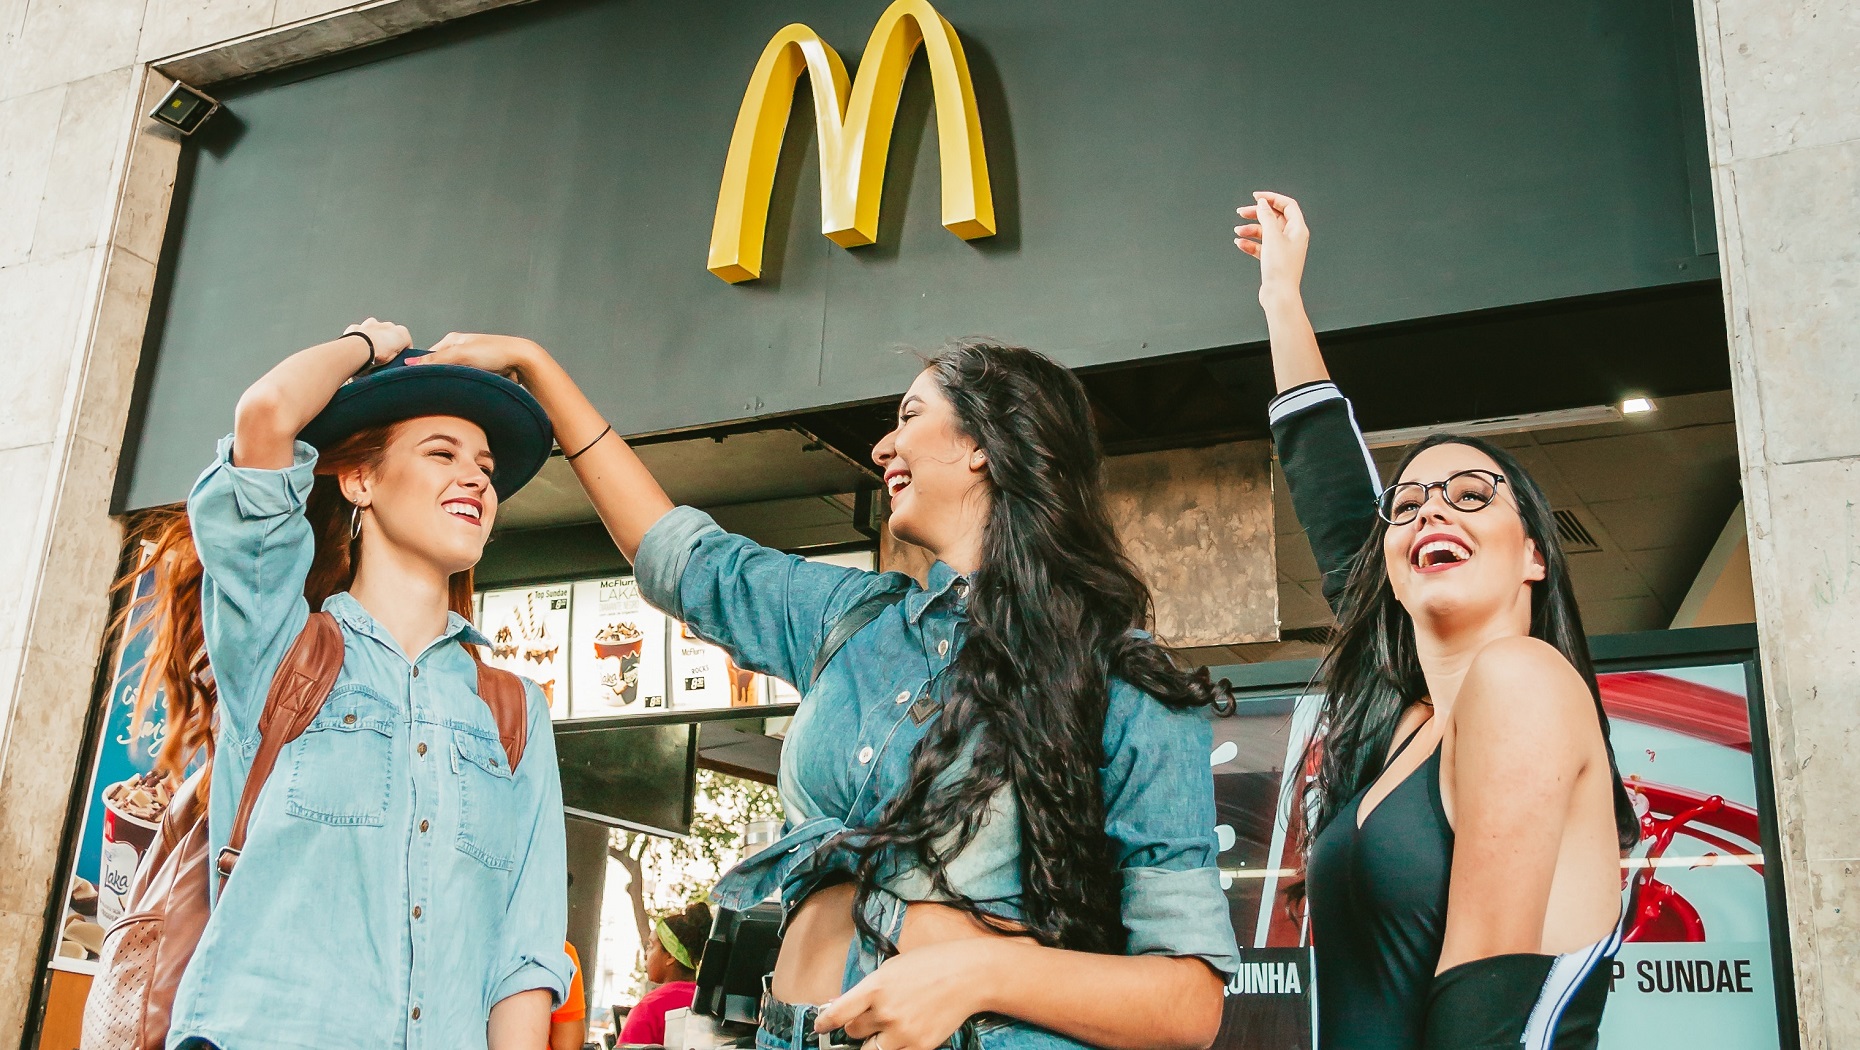 McDonald's is becoming an international entity